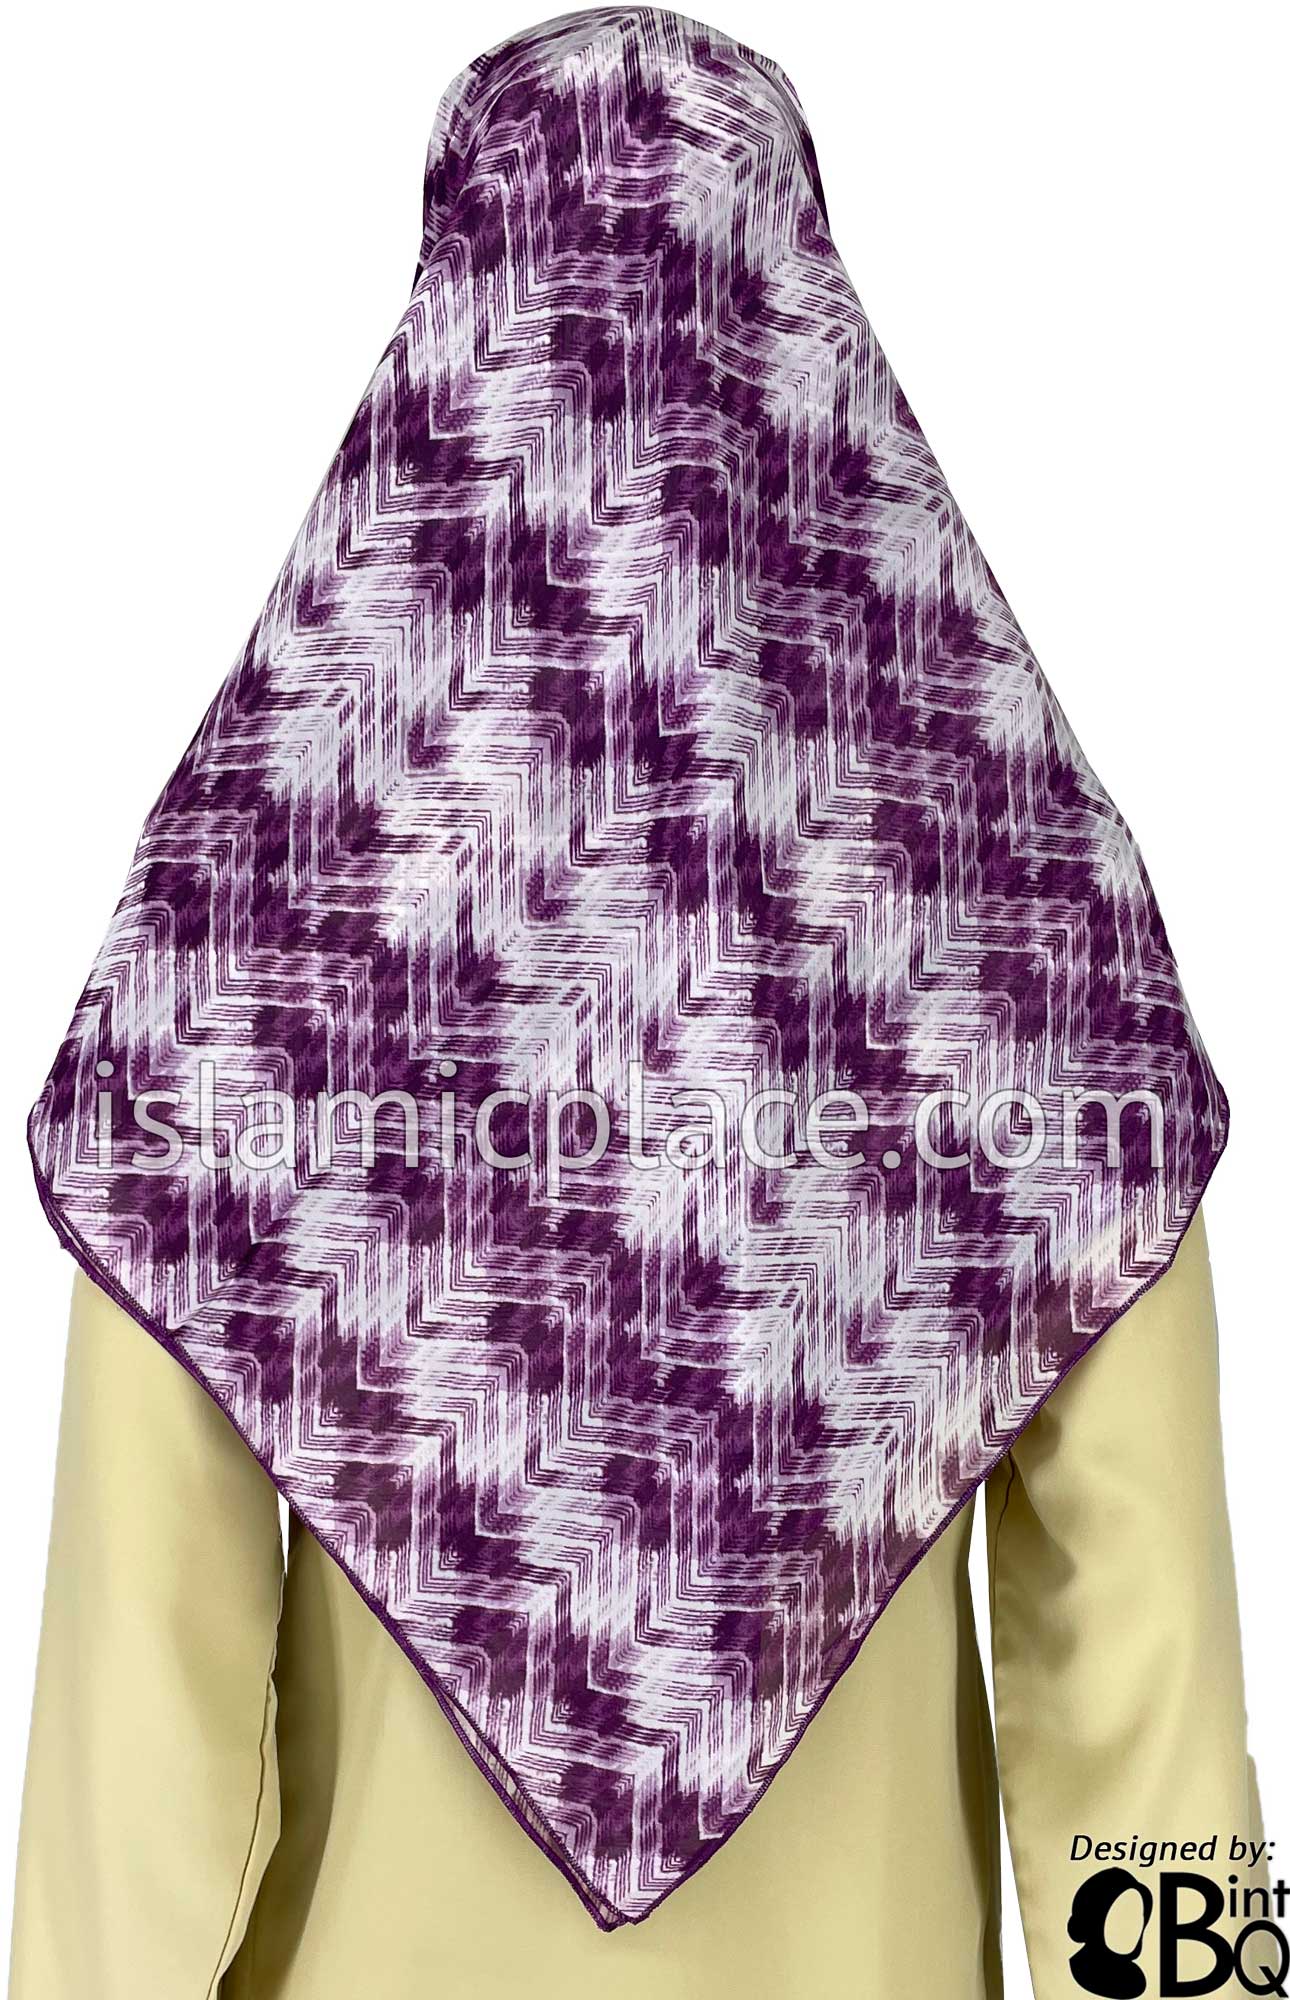 White Zig Zag Lines on Plum and White - 45" Square Printed Khimar